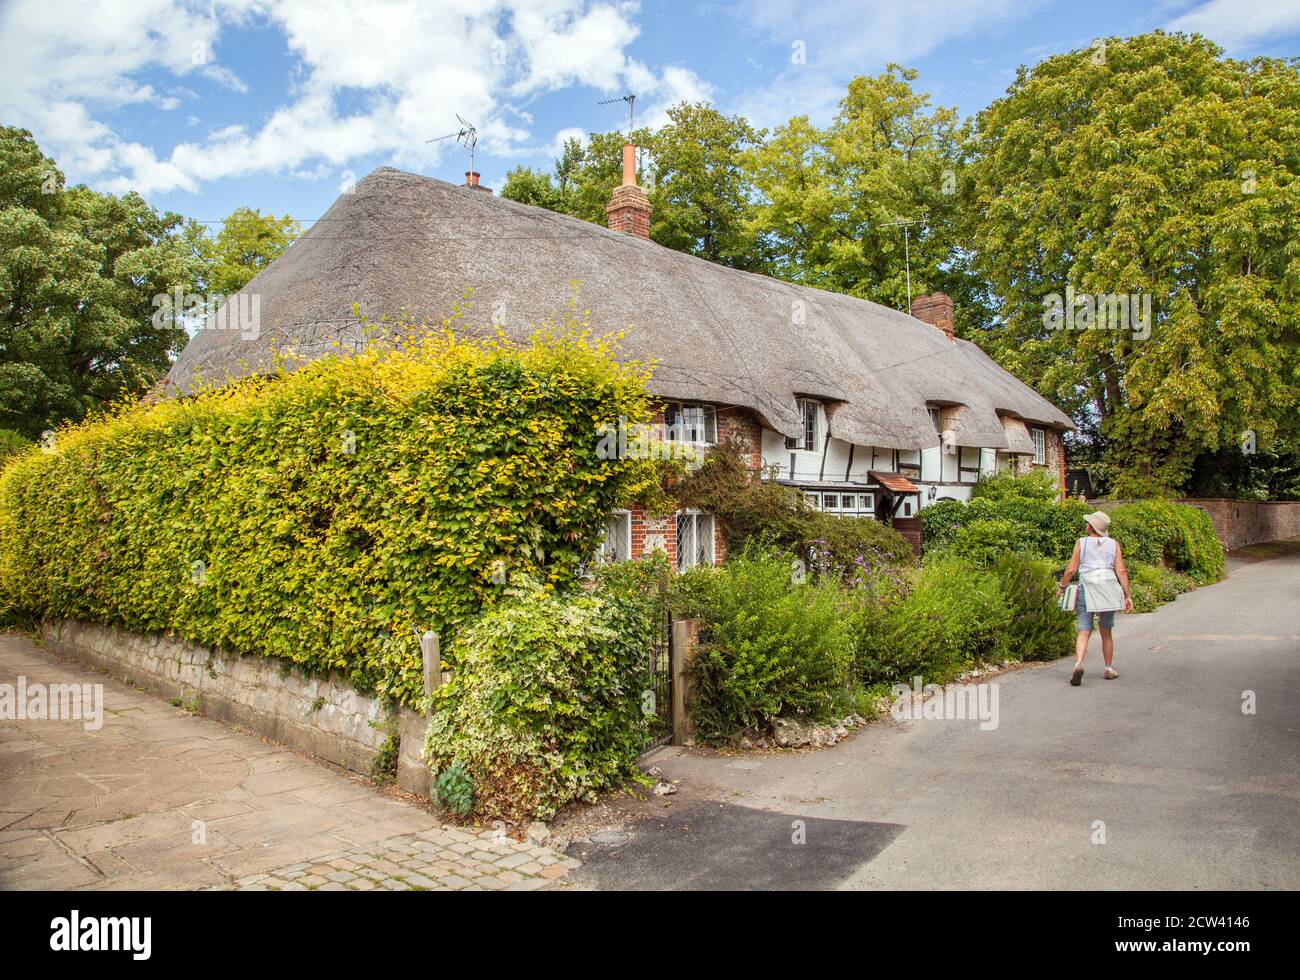 Idyllic English thatched roofed country cottages in the Buckinghamshire village of   Monks Risborough in the Chilterns England UK Stock Photo